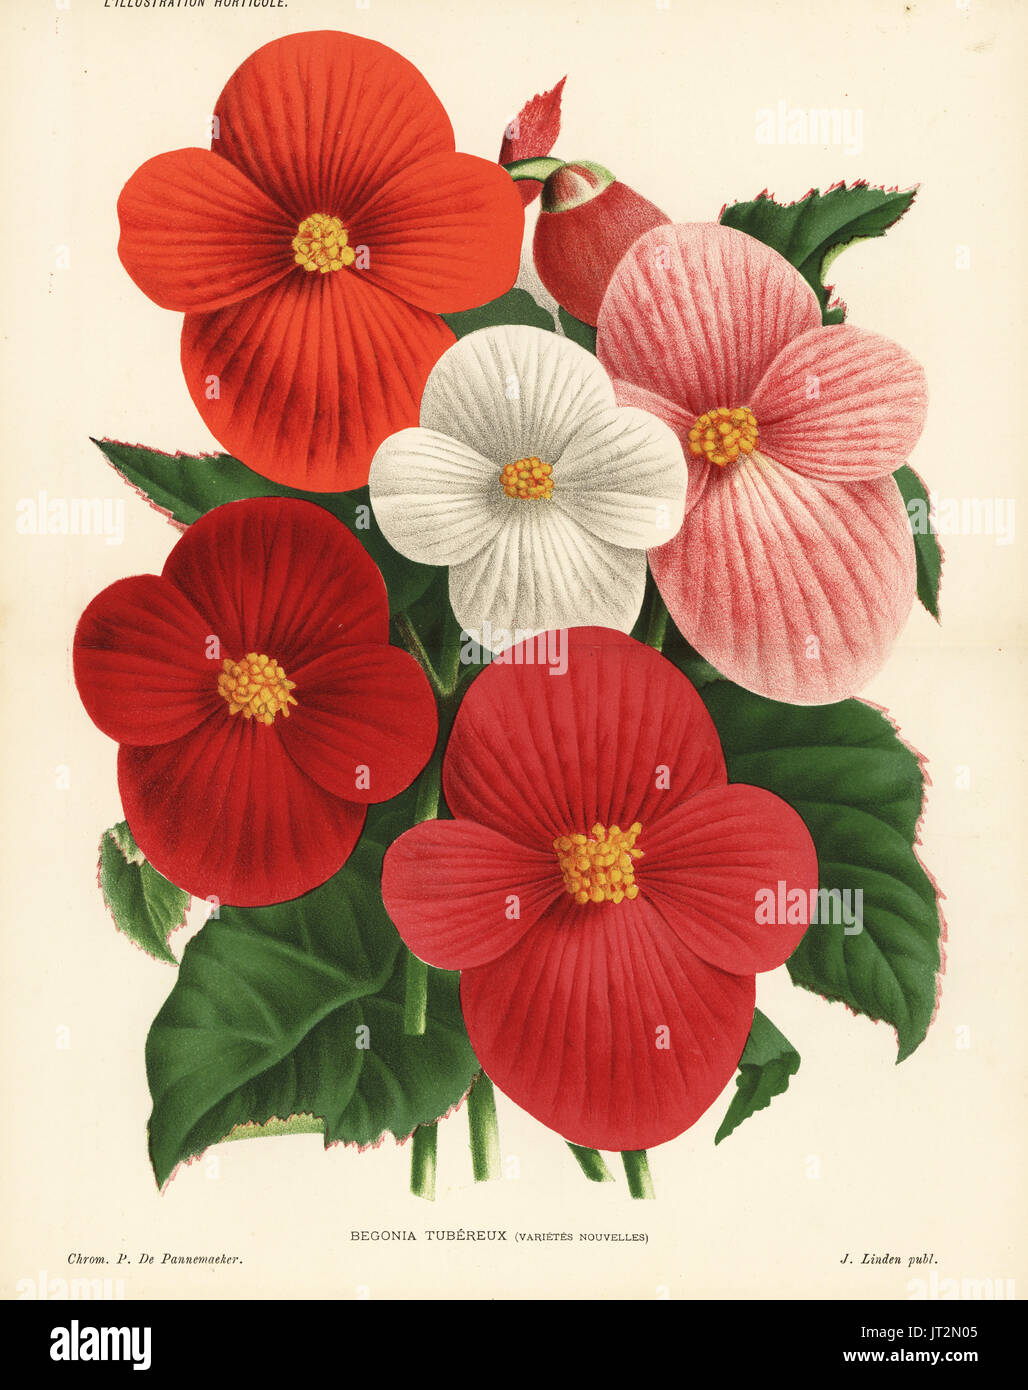 New varieties of begonia raised by Forgeot & Co. of Paris, Begonia species. Chromolithograph by Pieter de Pannemaeker from Jean Linden's l'Illustration Horticole, Brussels, 1885. Stock Photo